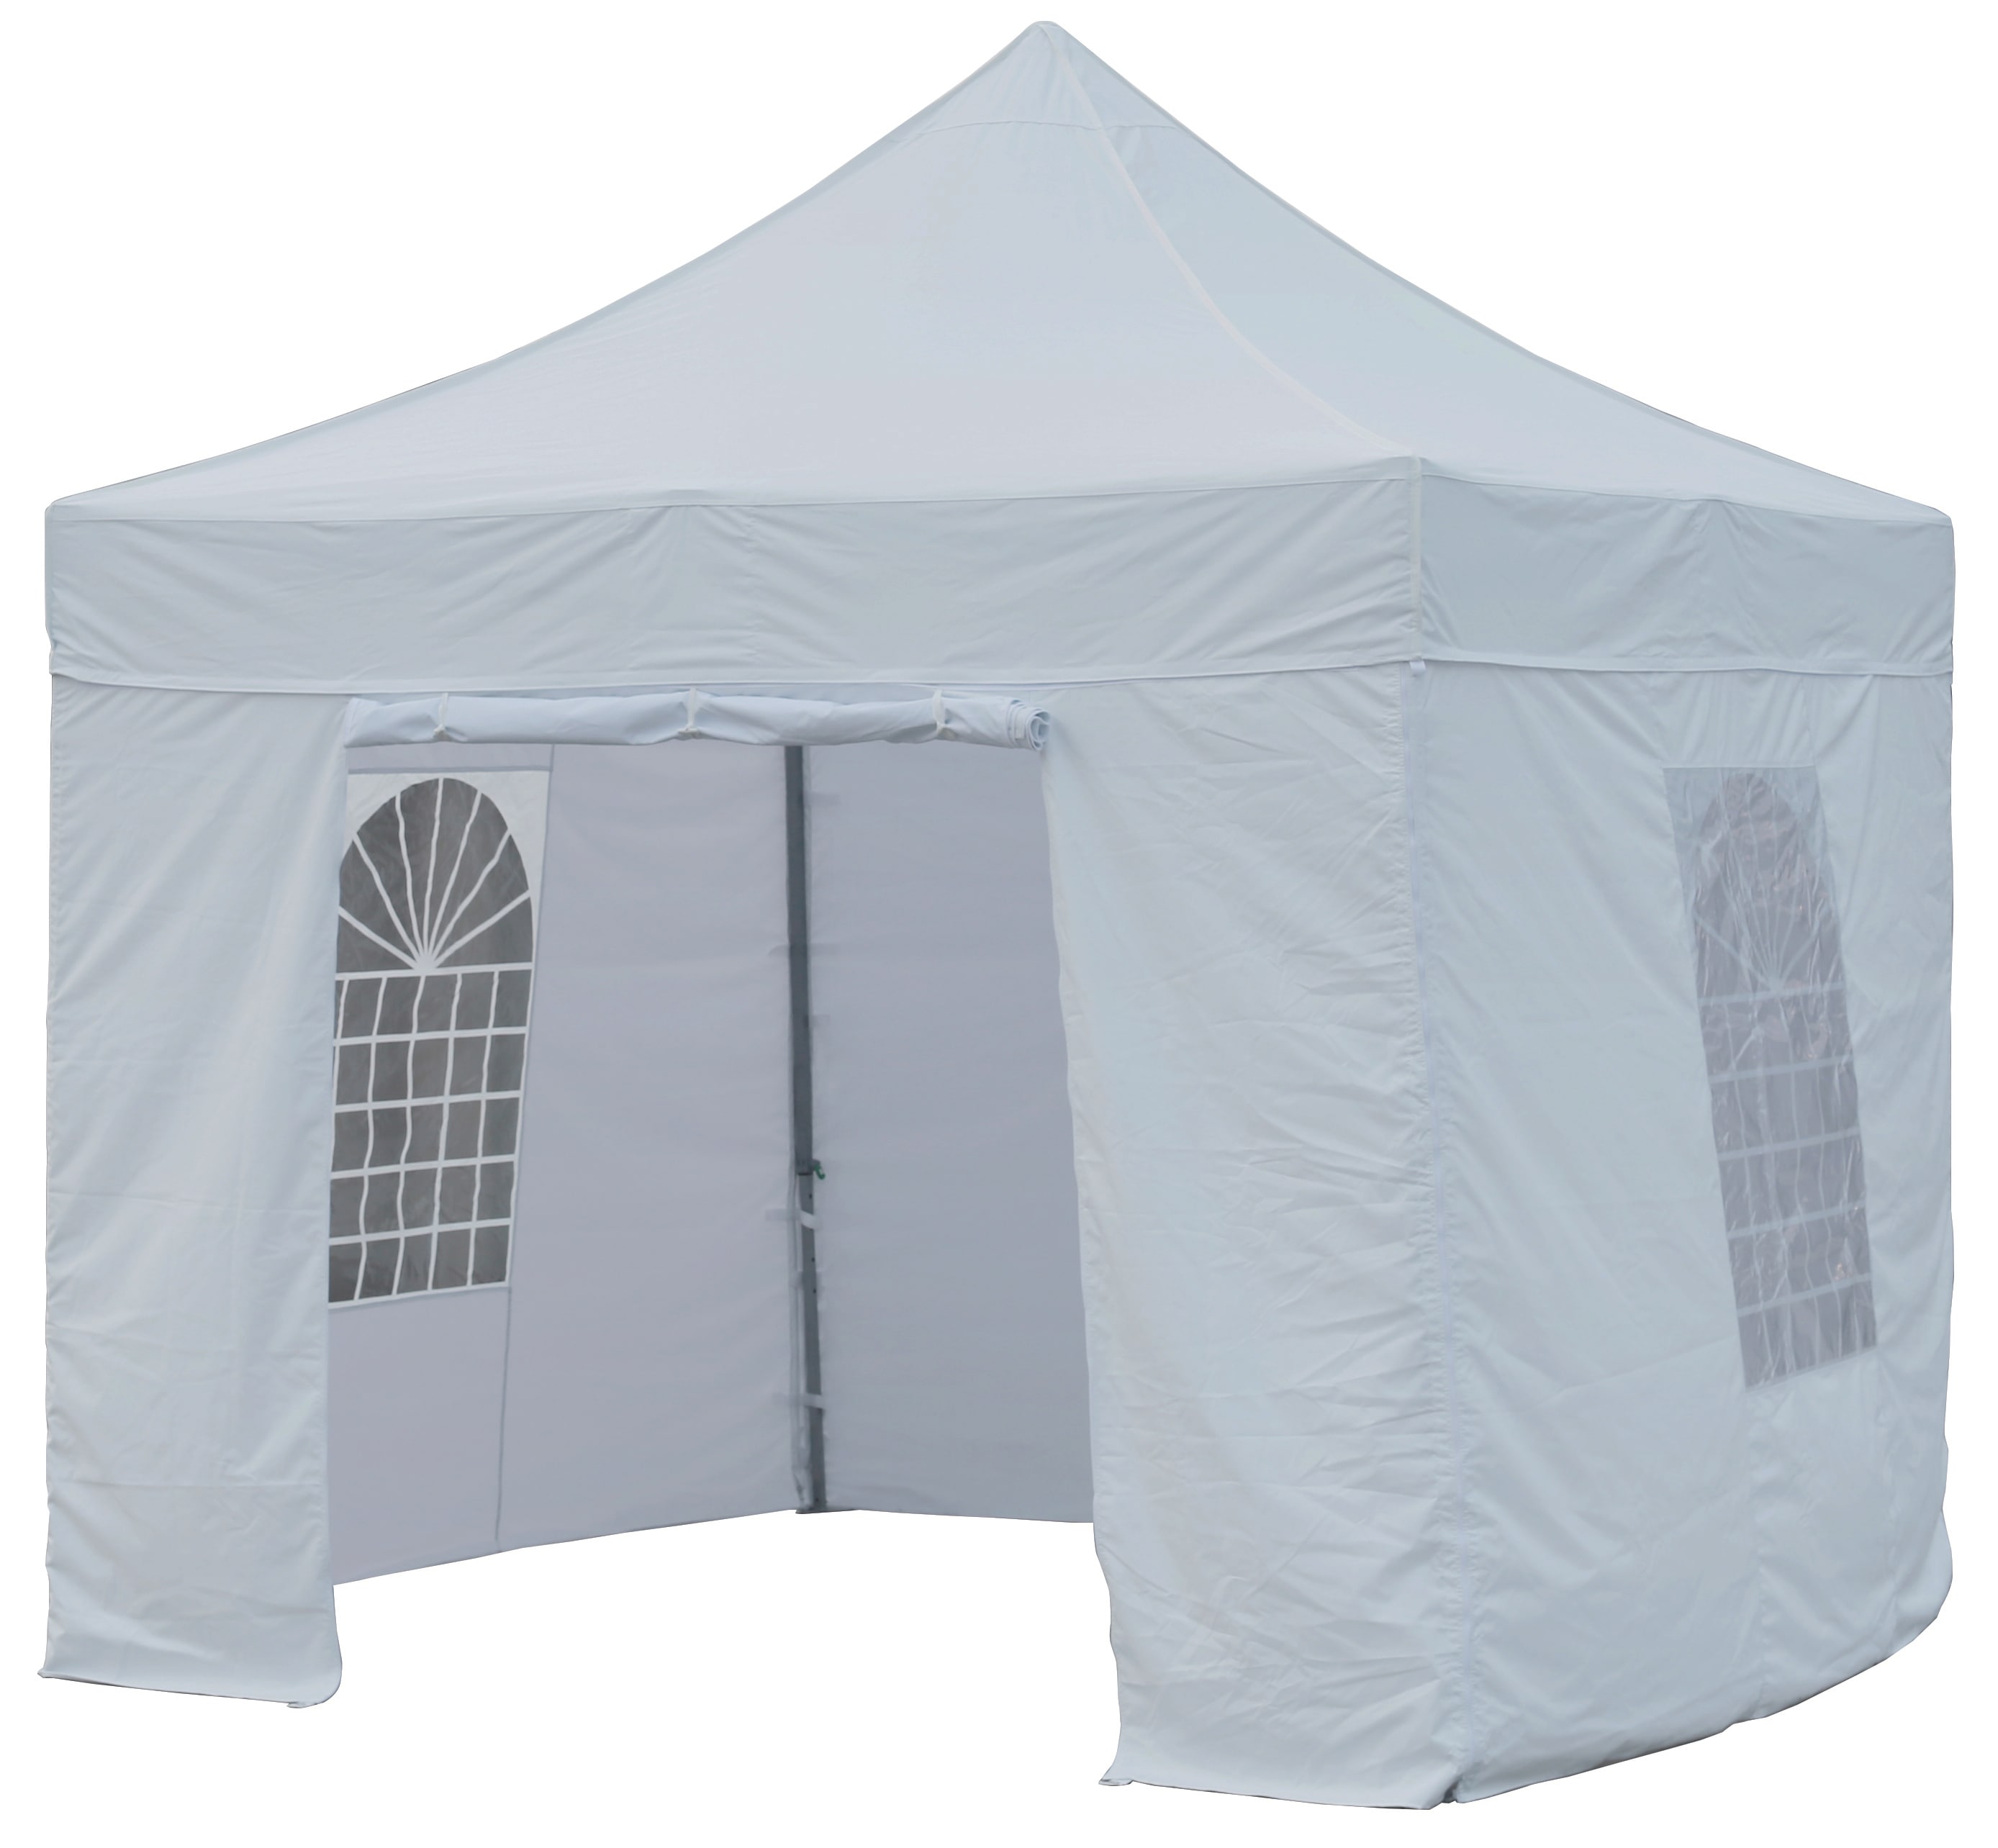 4 Wall kit in Polyester (1 plain, 1 door + 2 walls with window)